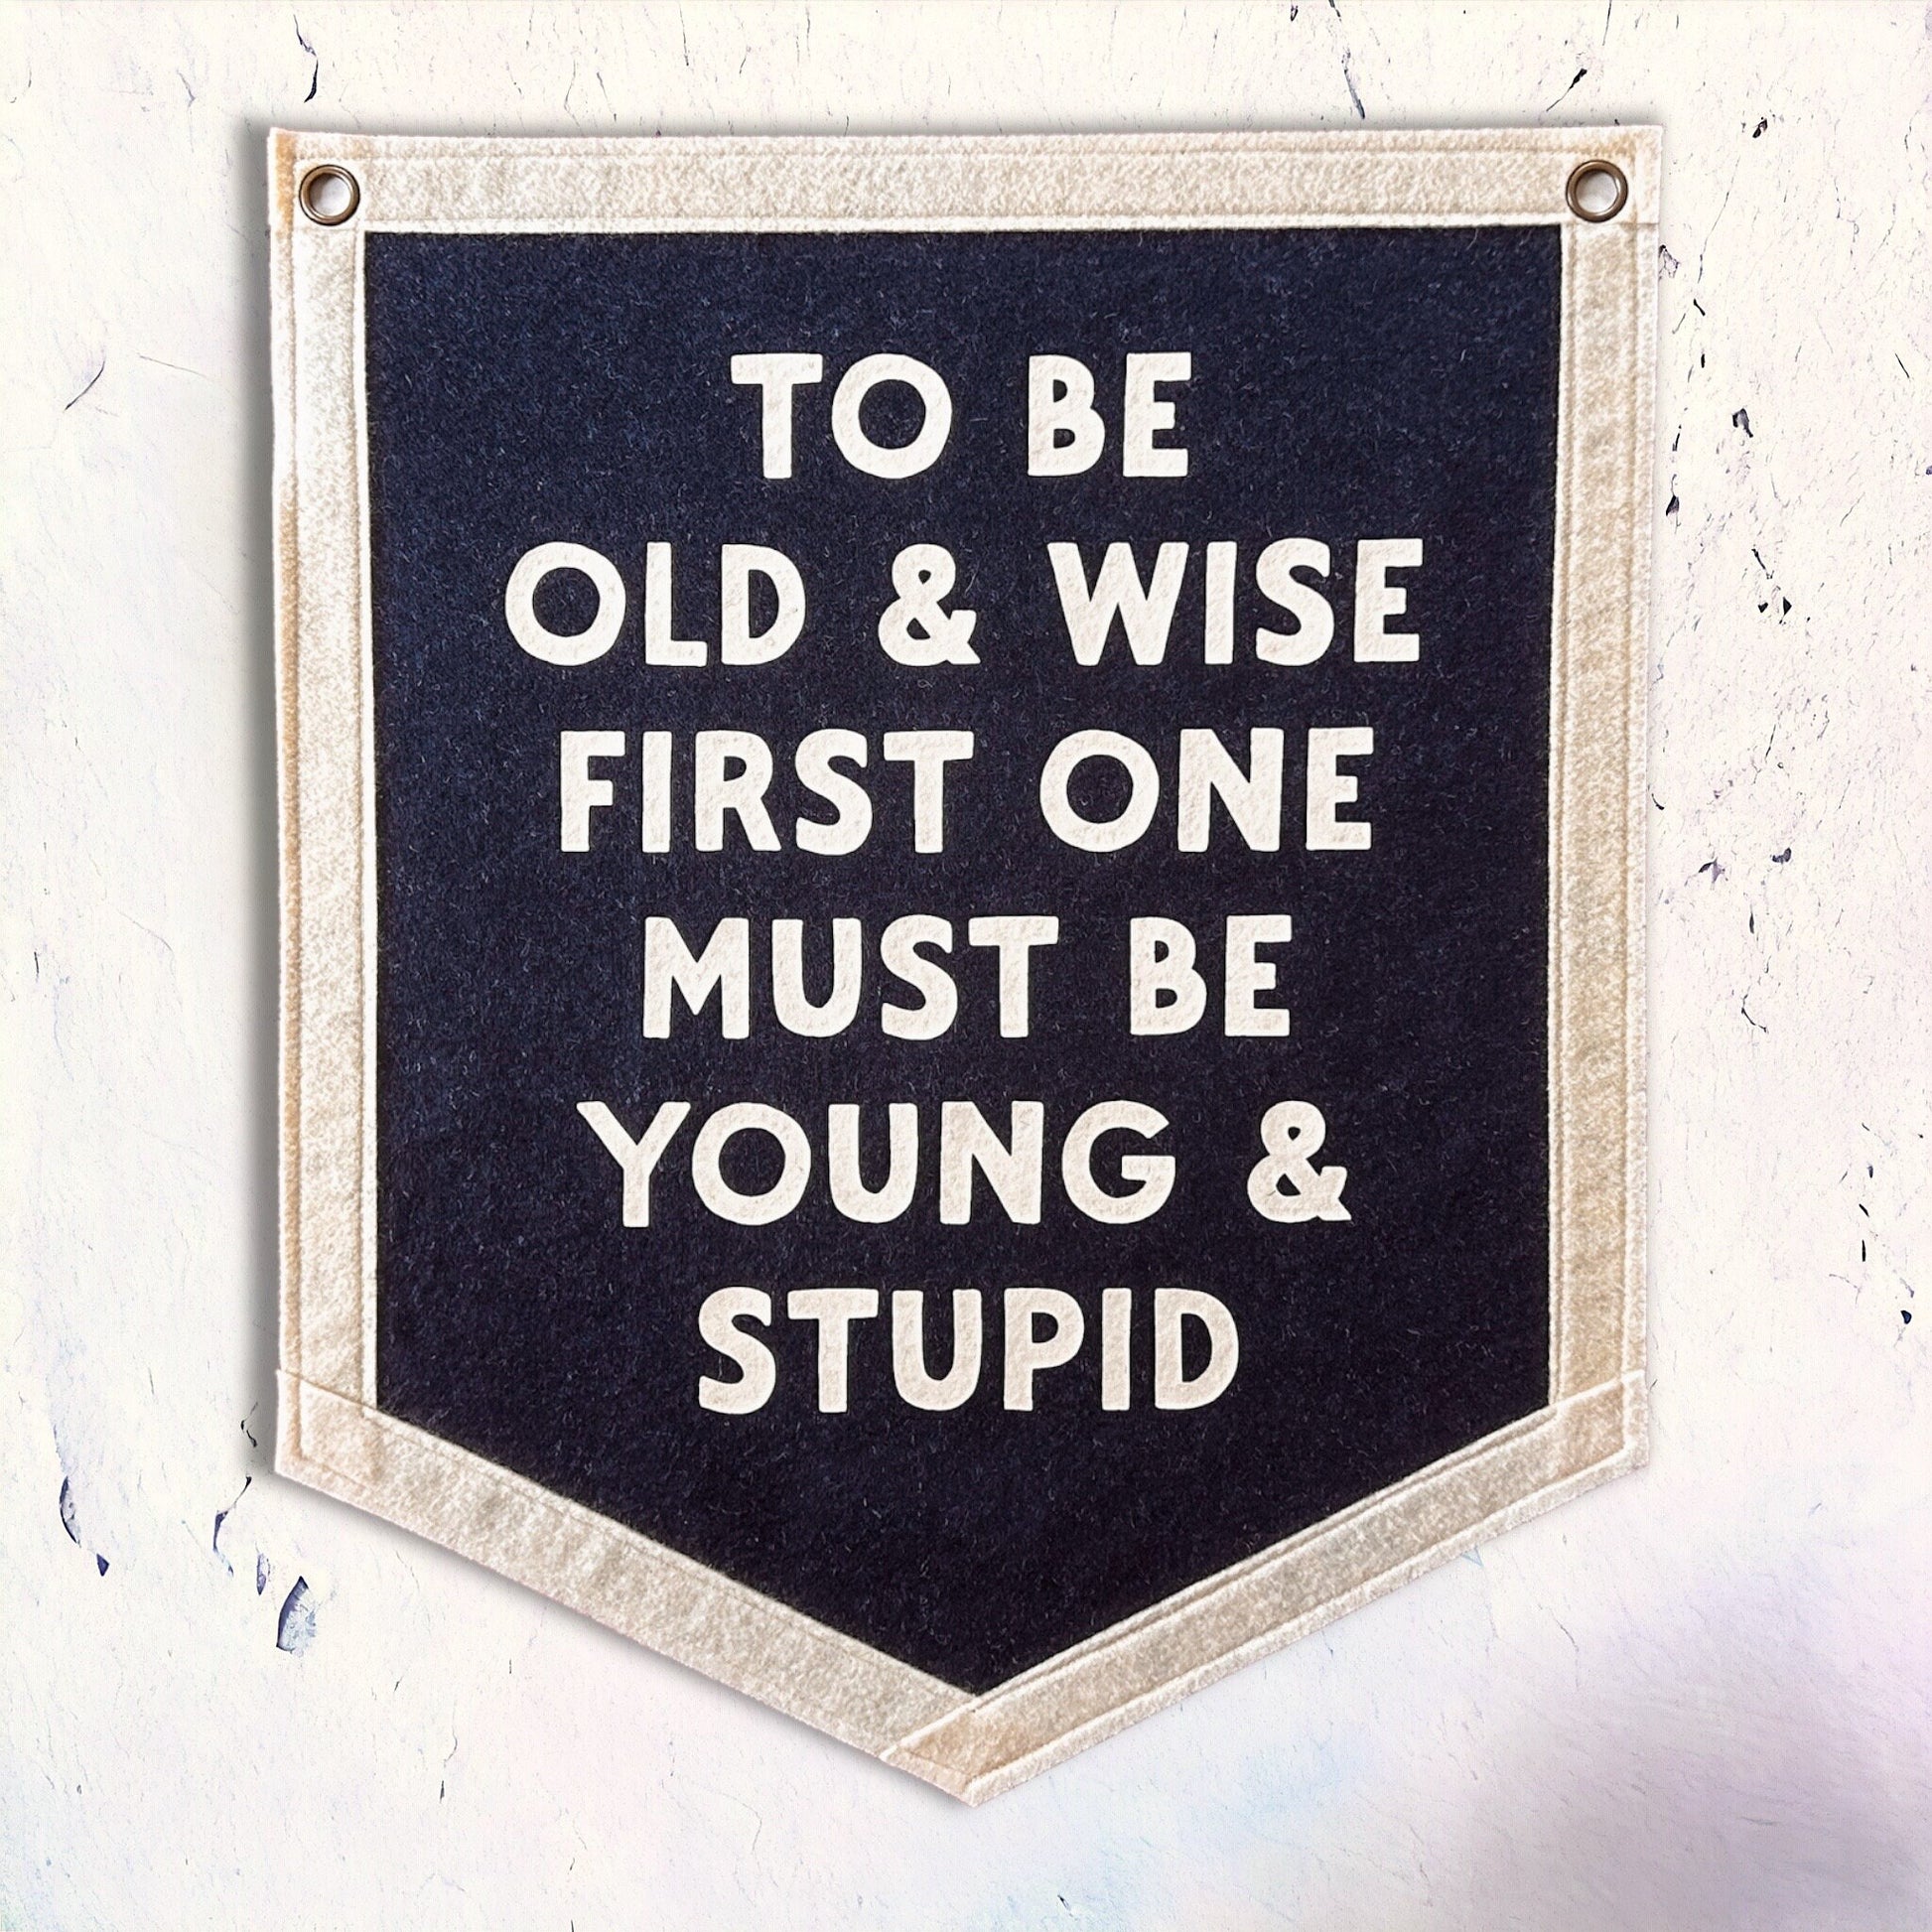 To be Old and Wise, first one must be Young and Stupid | Felt Pennant Flag Banner | Vintage Banner | Wall Decor | Wall Hanging